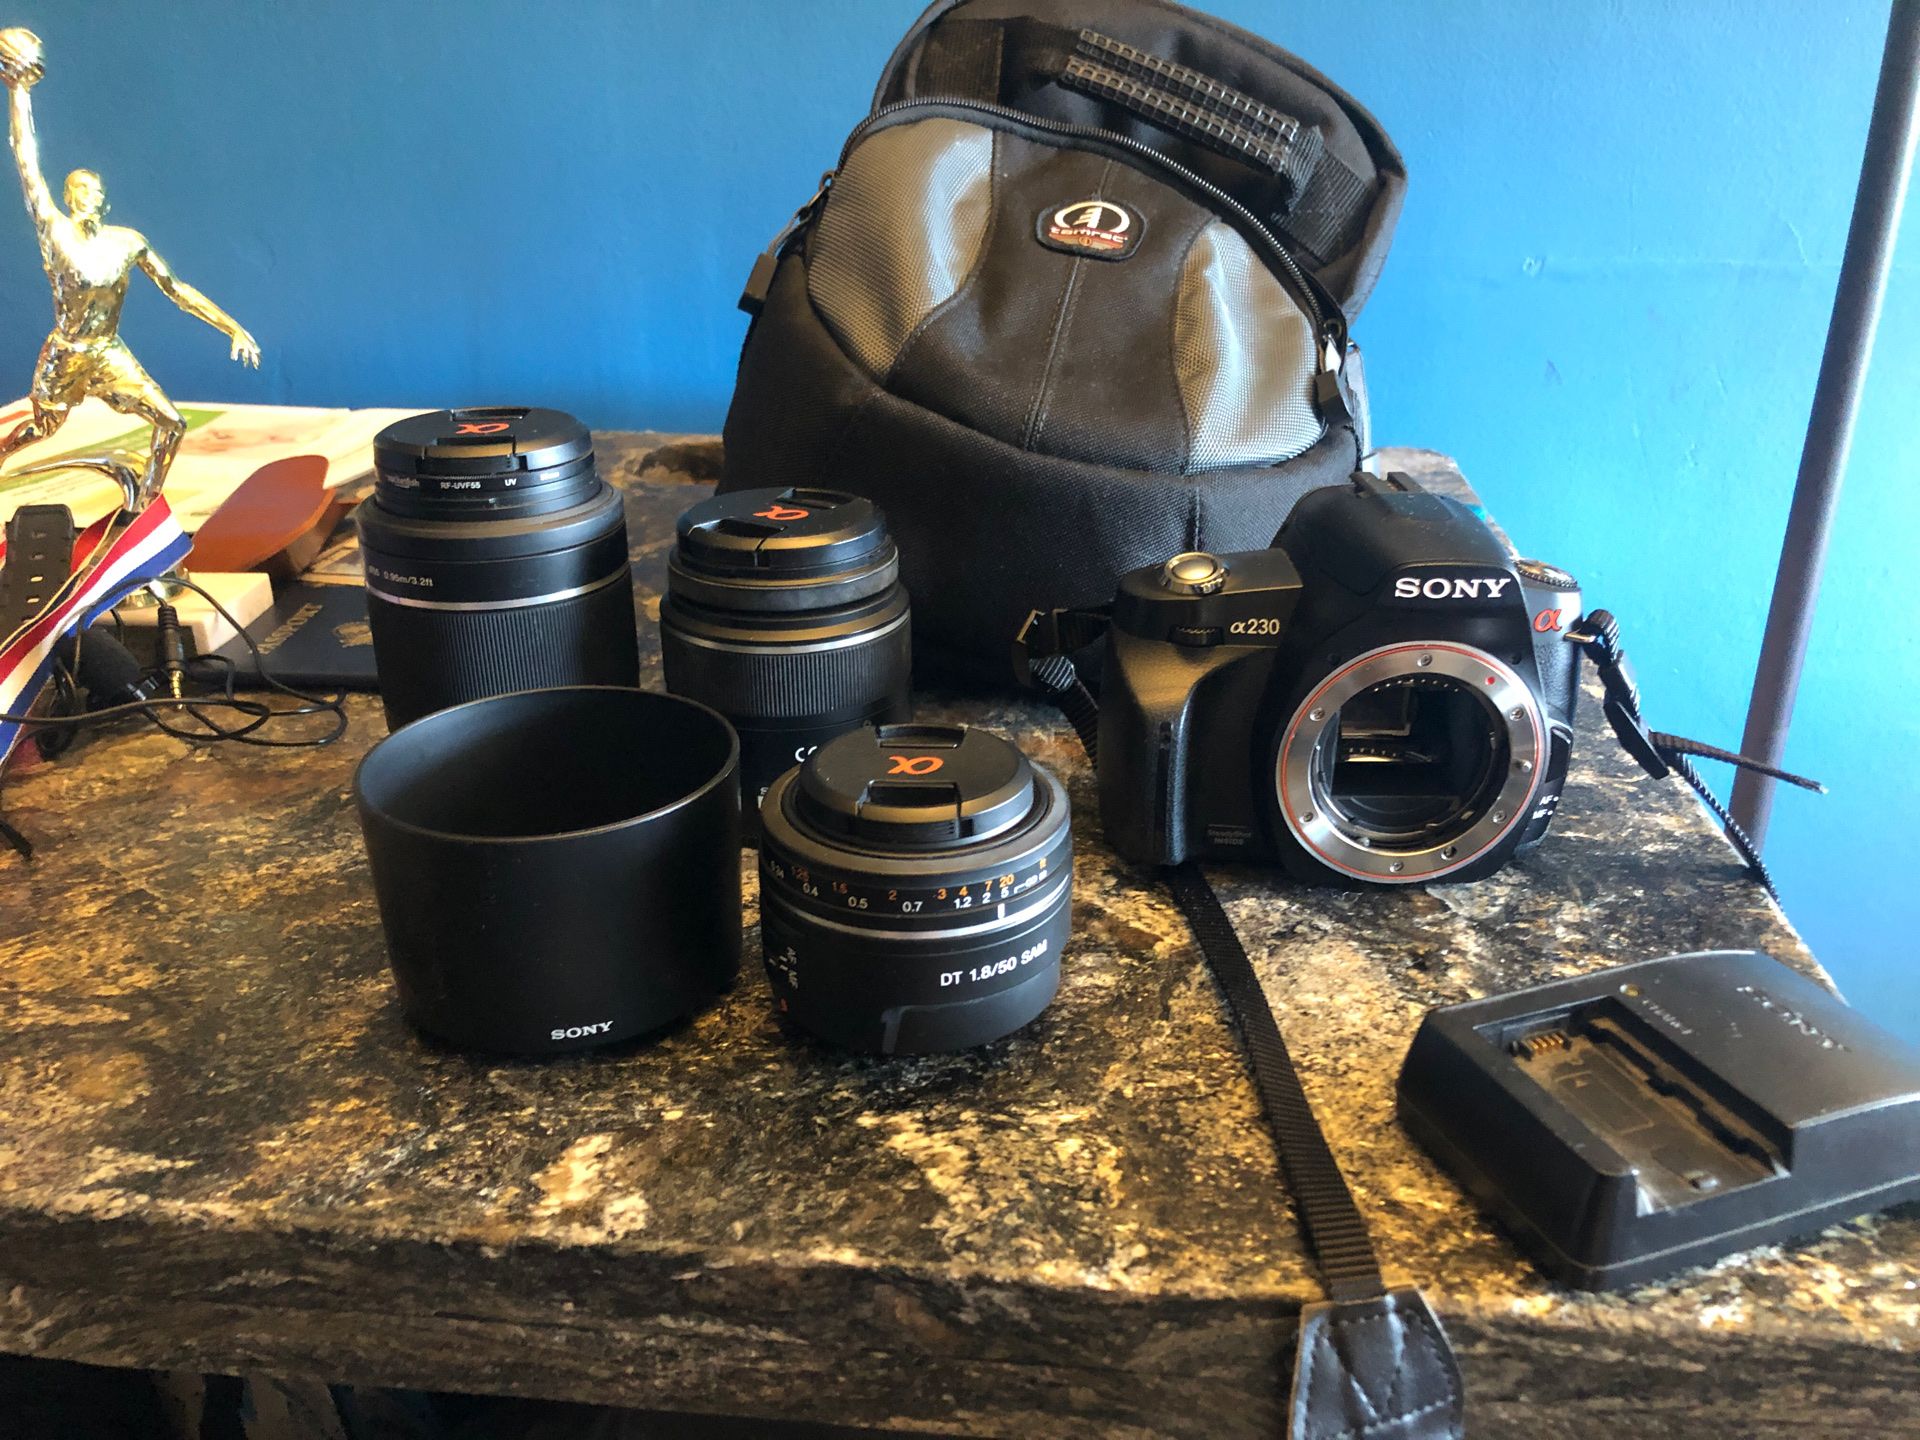 Sony A230 DSLR Camera with 3 lens, battery, charger, and camera bag